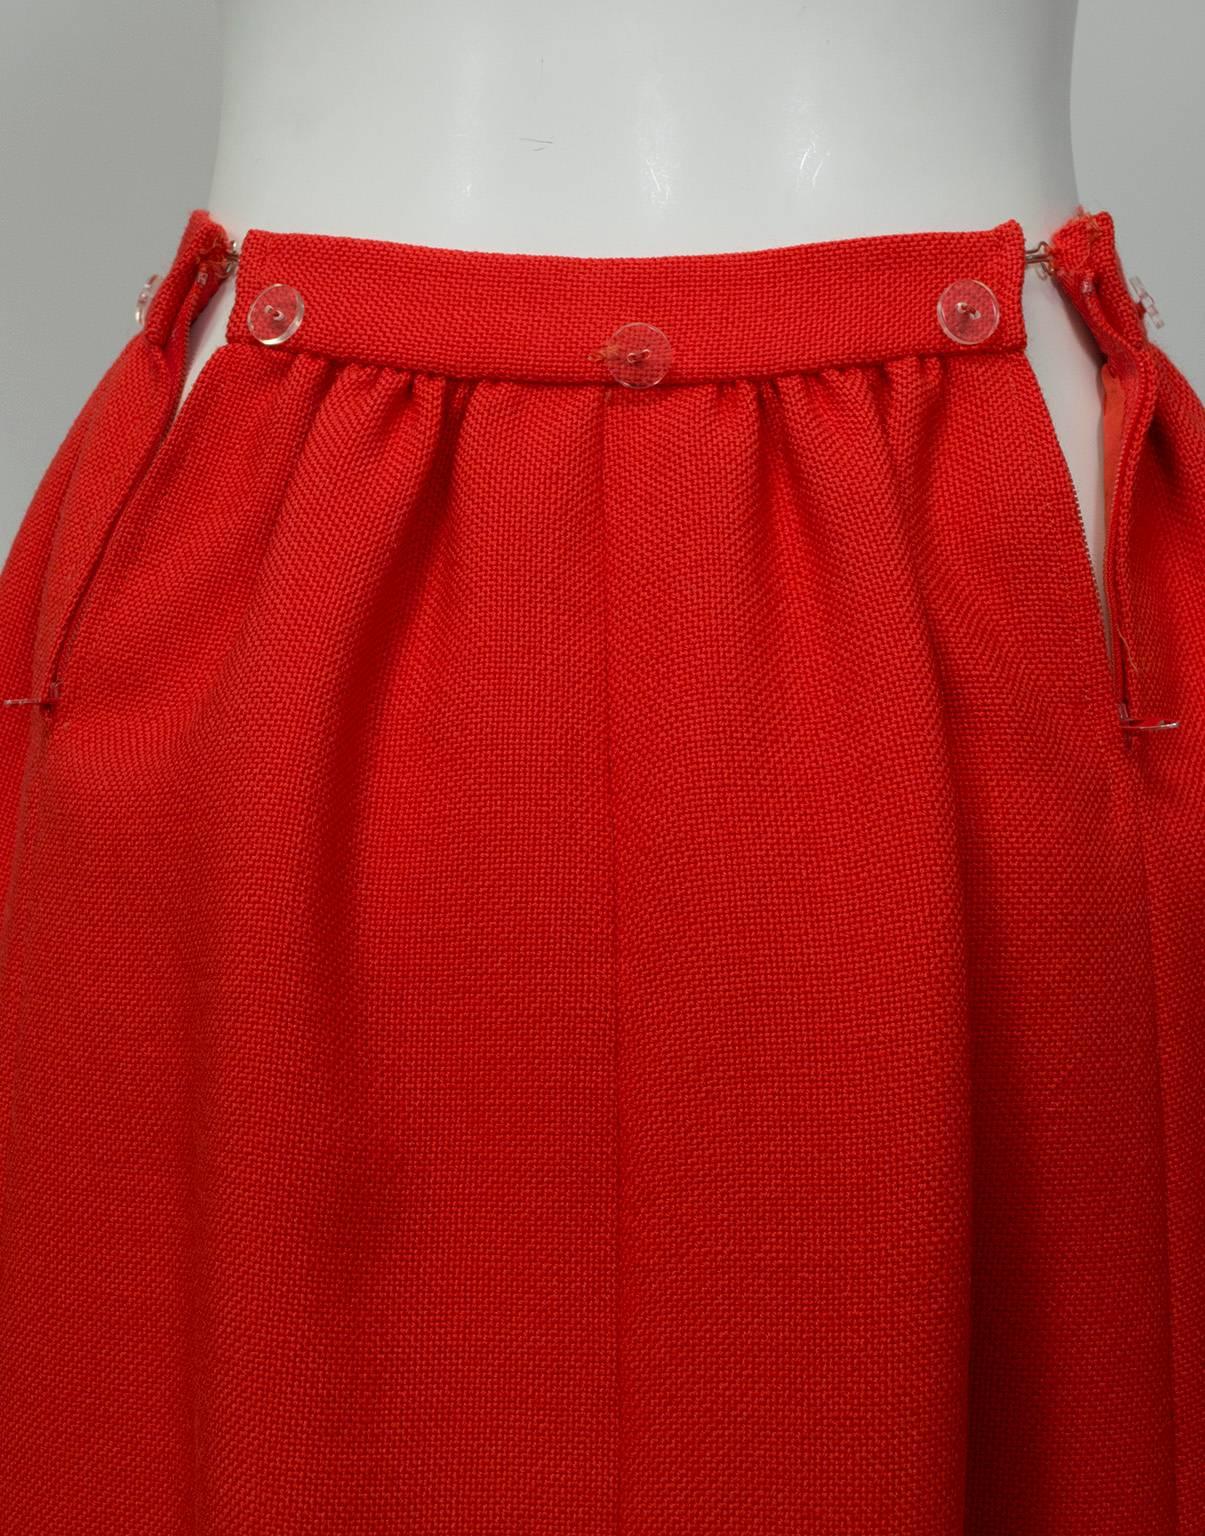 Norman Norell Heavyweight Red Gathered Hostess Skirt - Small, 1960s For Sale 5